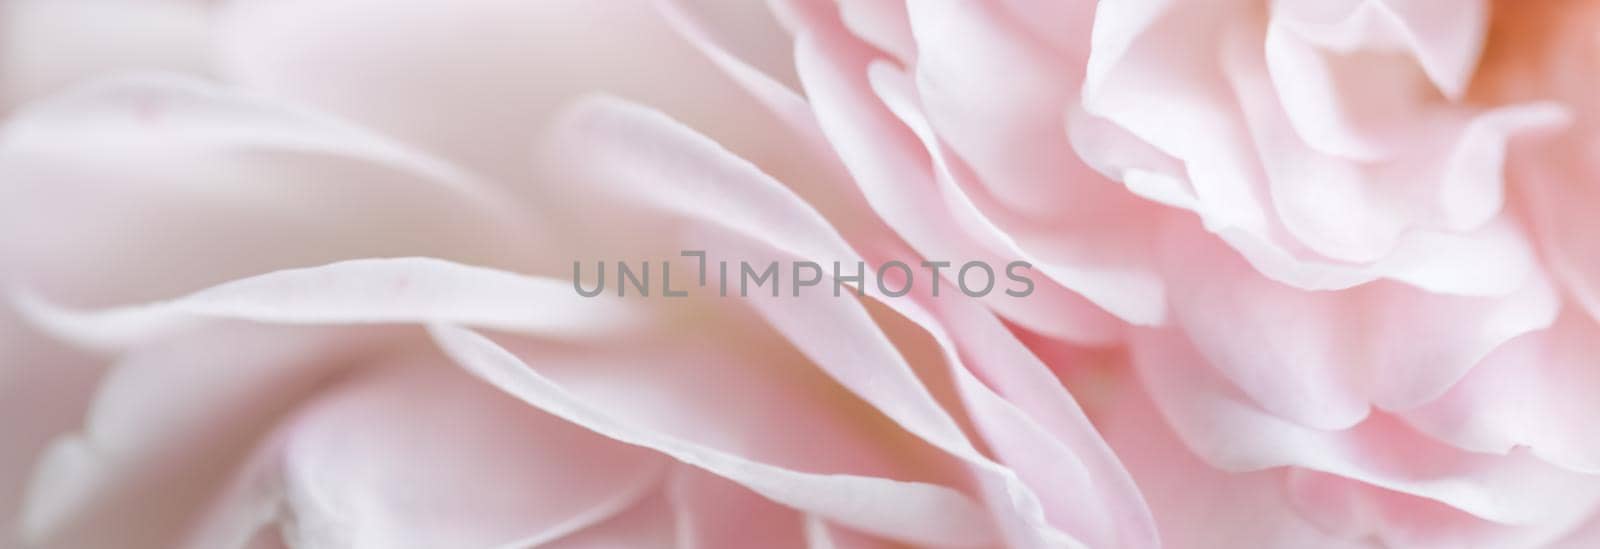 Botanical concept, wedding invitation card - Soft focus, abstract floral background, pale pink rose petals. Macro flower backdrop for holiday brand design